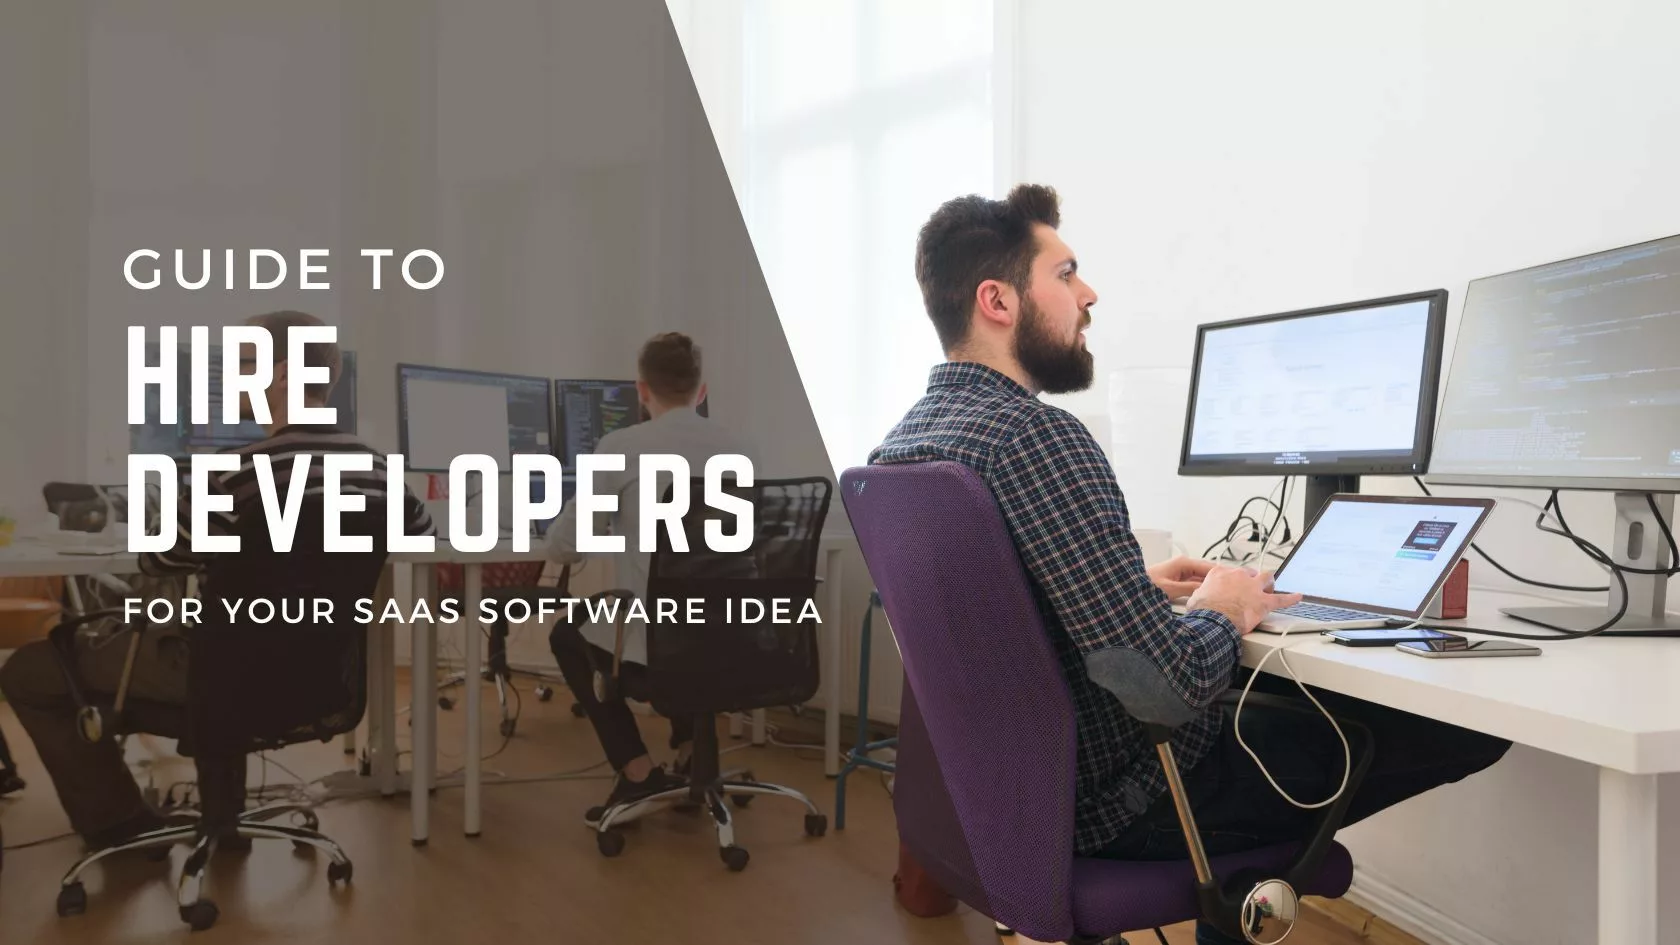 Guide to Hire Developers for Your SaaS Software Idea